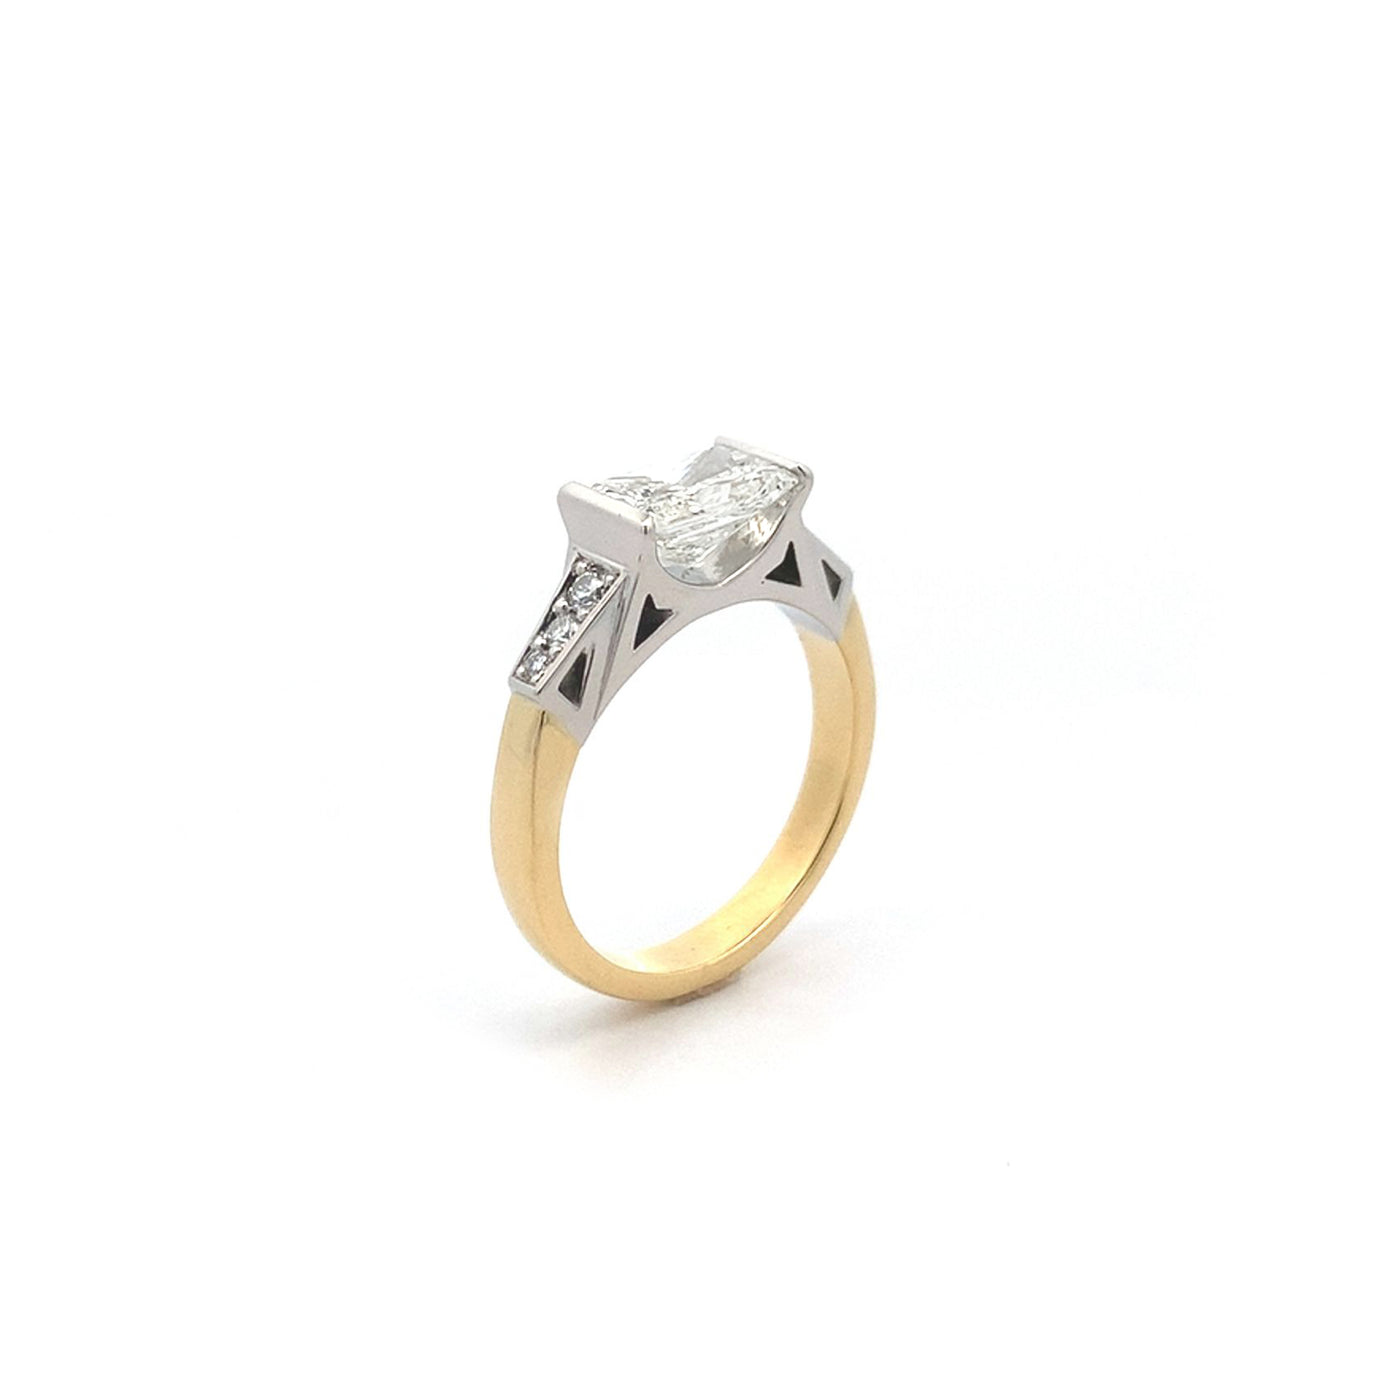 Golden Gate: Elongated Princess Cut Solitaire Ring in Yellow Gold | 1.70ct